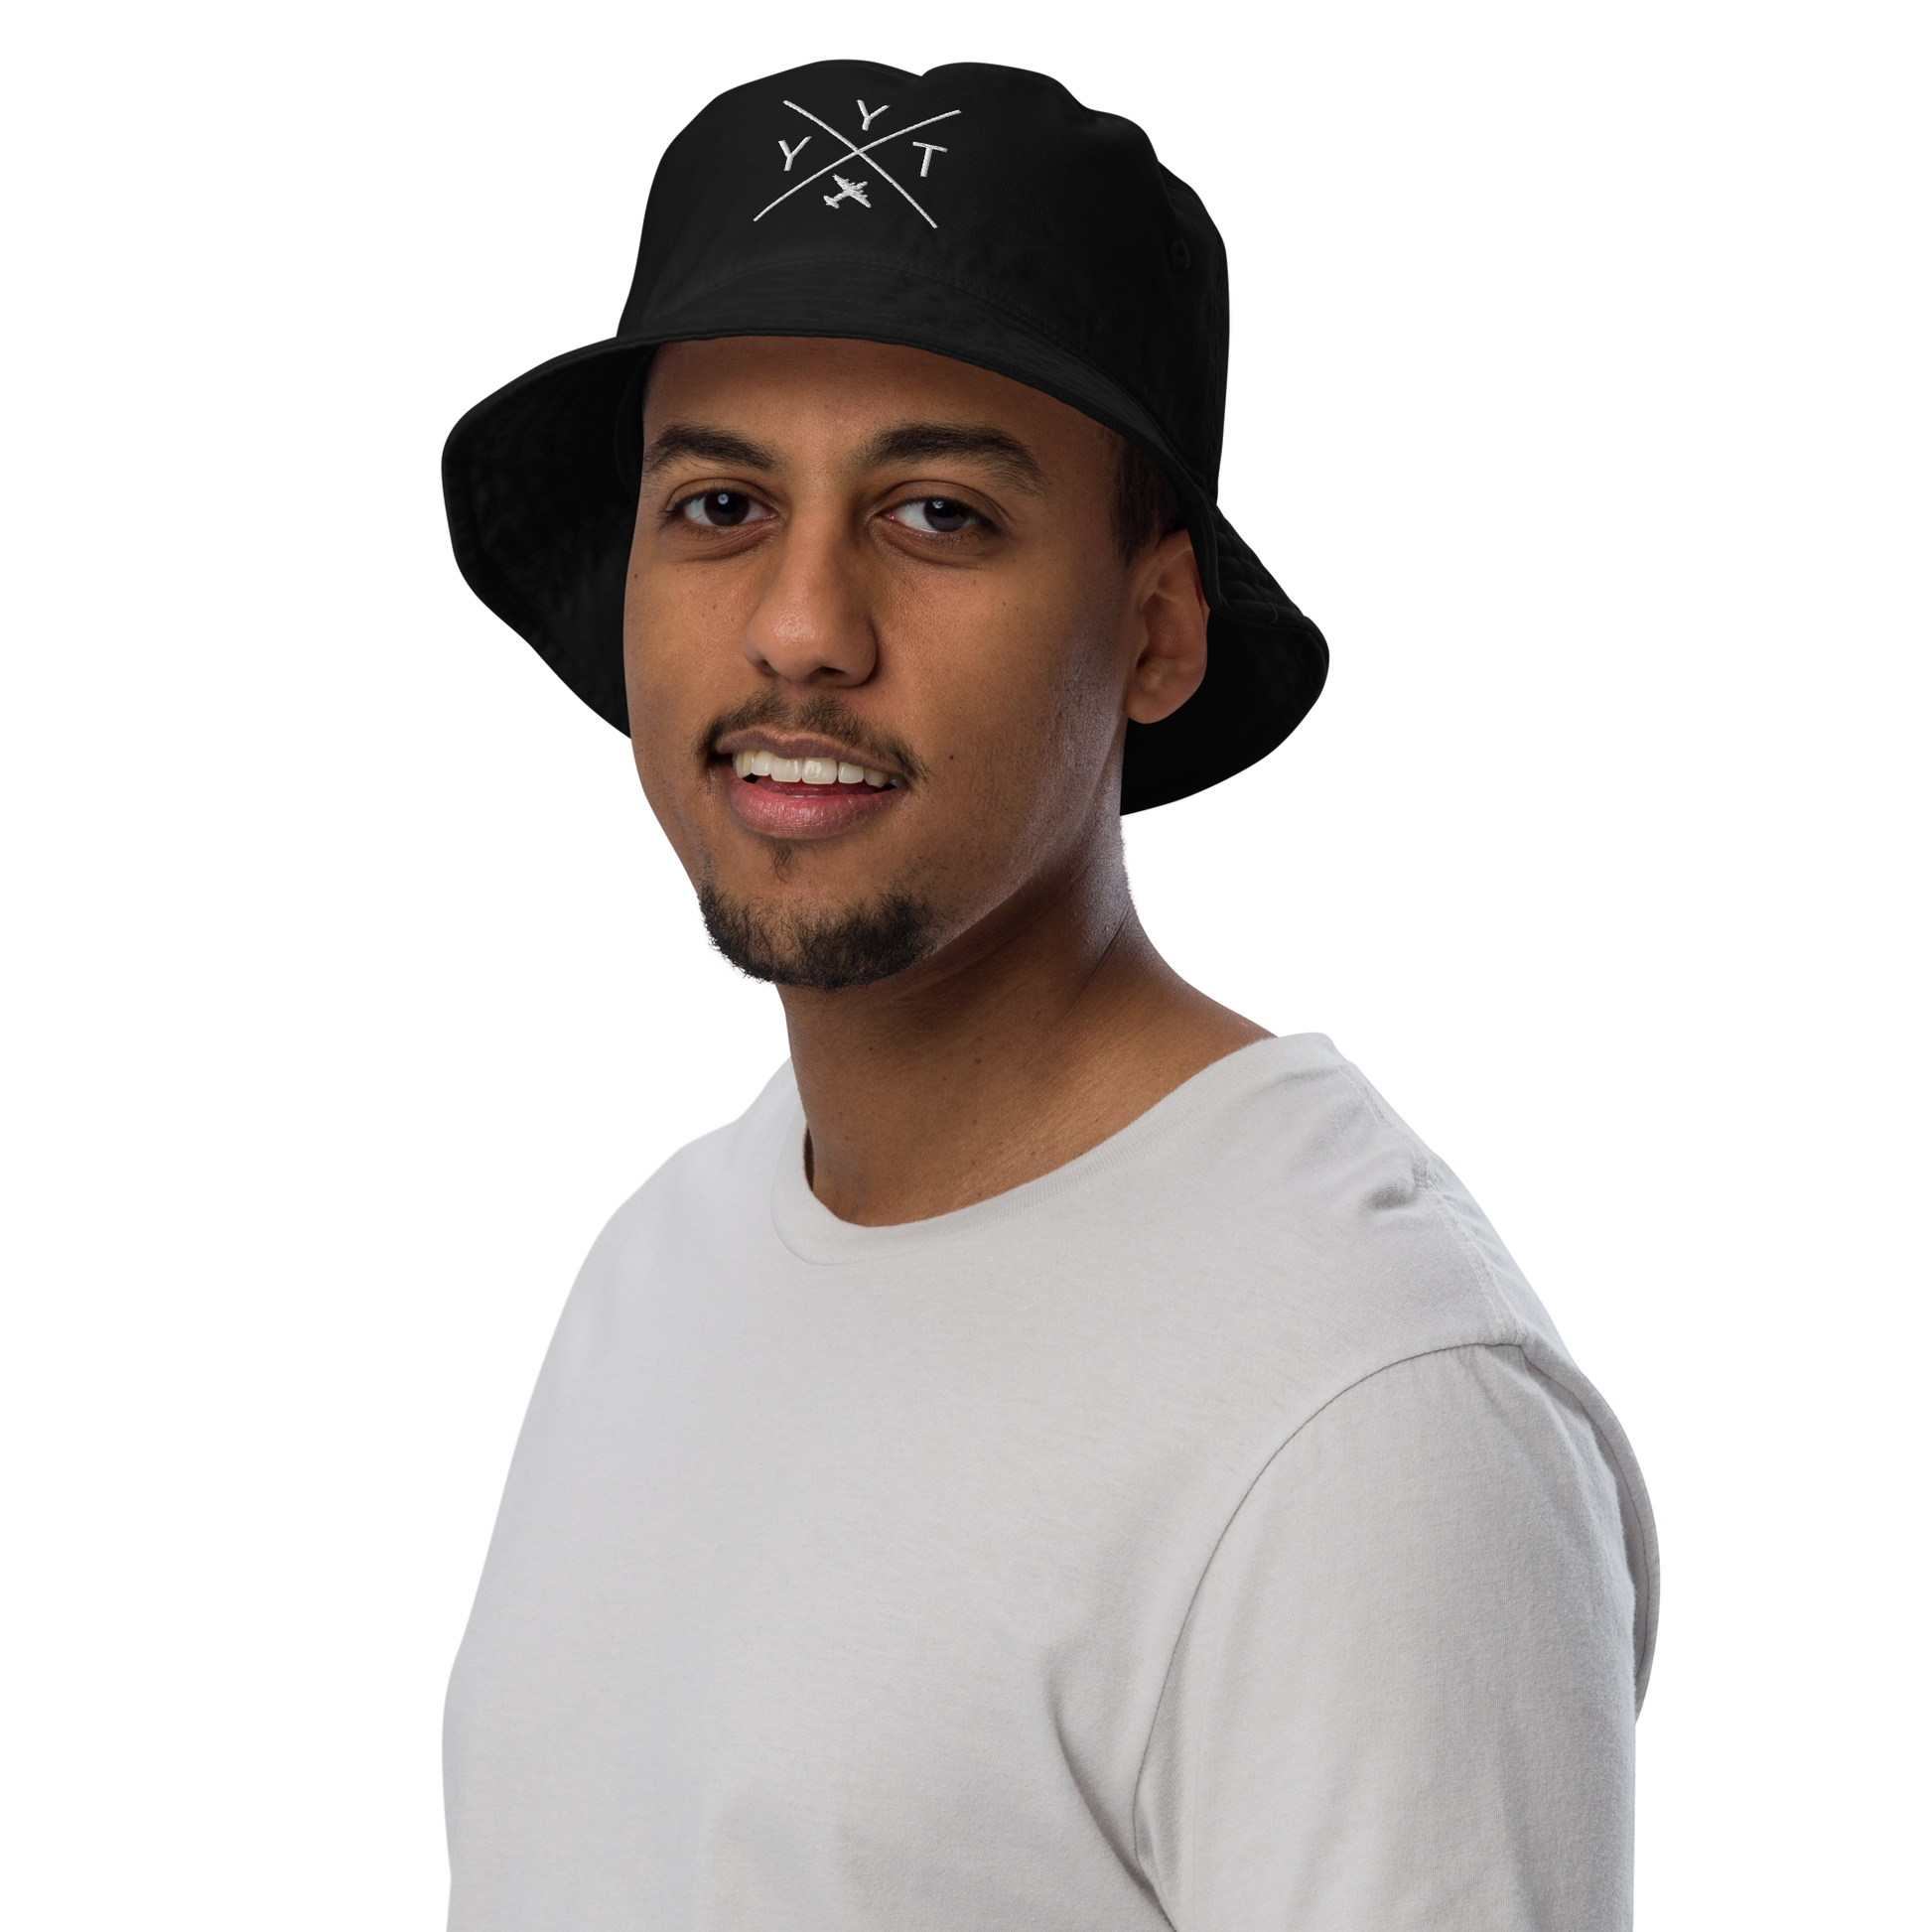 YHM Designs - YYT St. John's Organic Cotton Bucket Hat - Crossed-X Design with Airport Code and Vintage Propliner - White Embroidery - Image 05